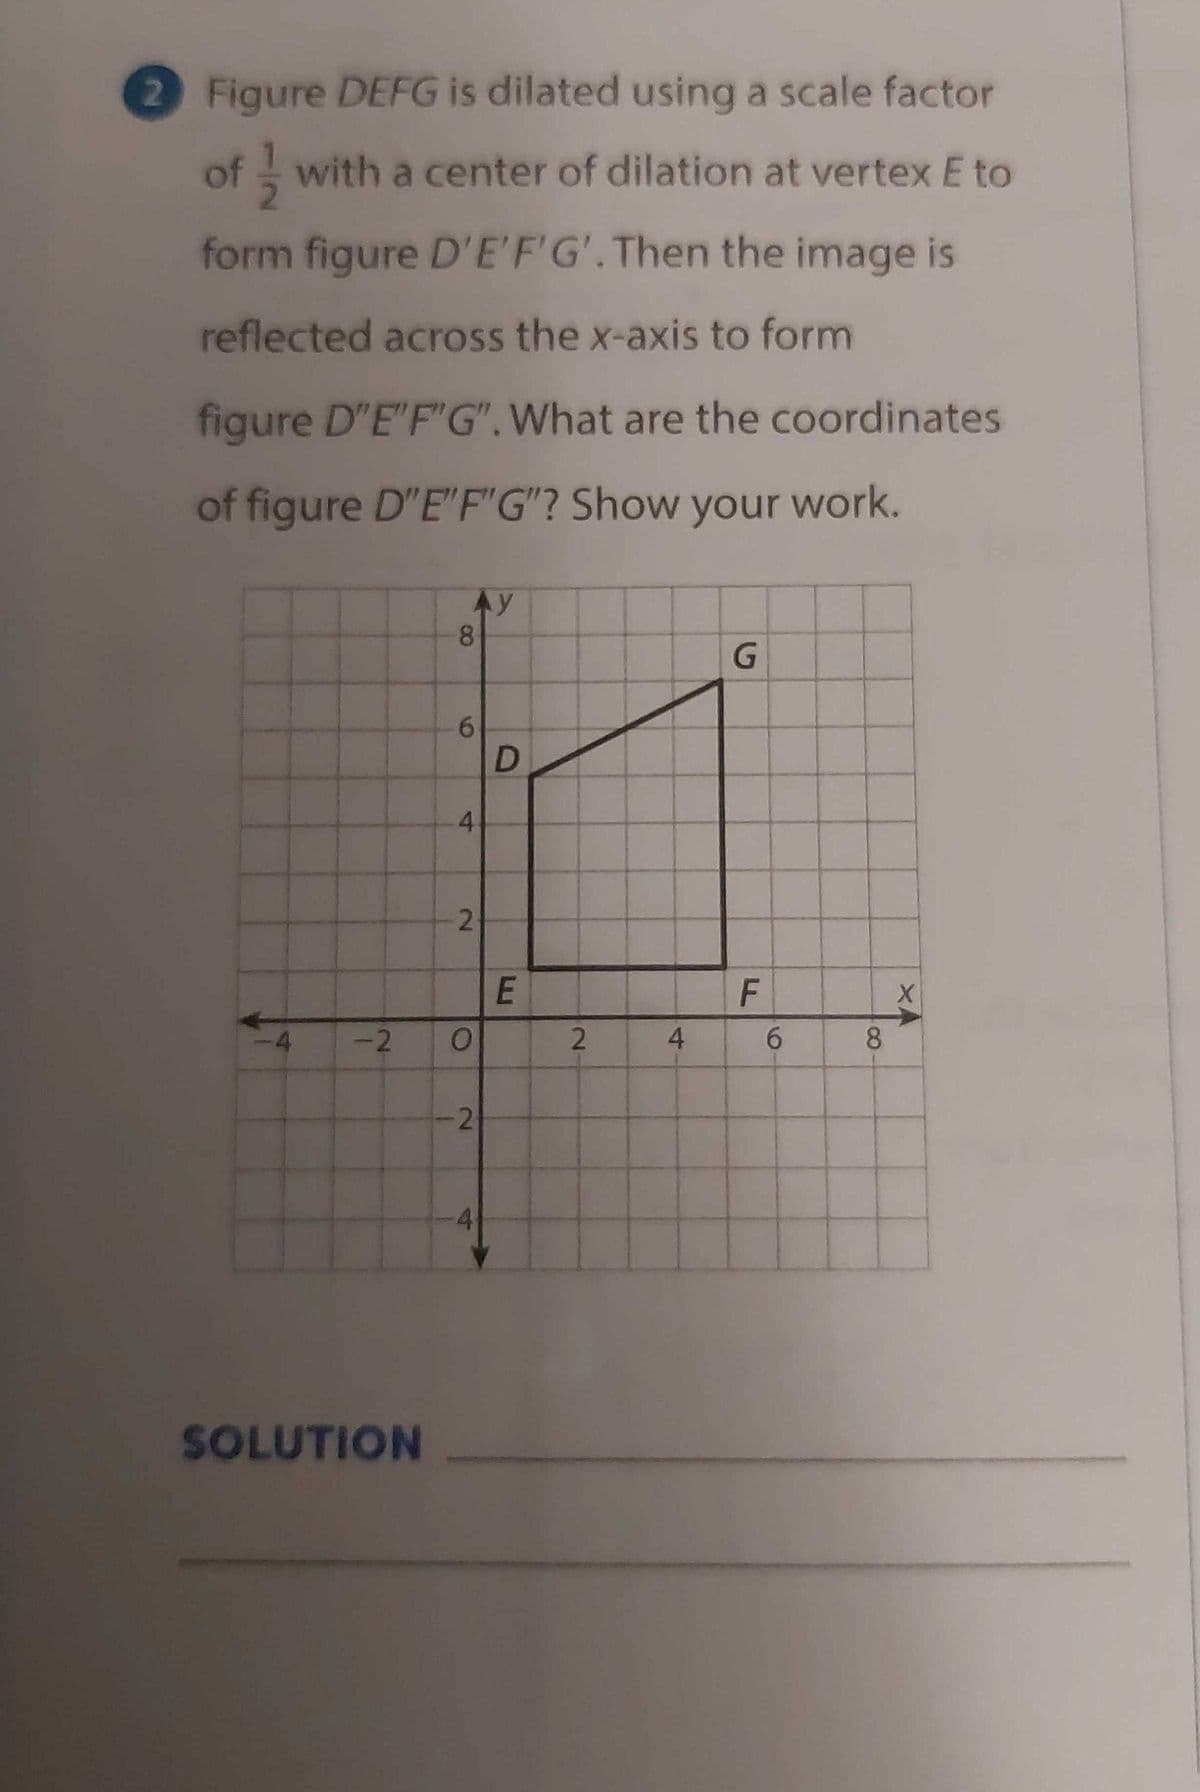 2 Figure DEFG is dilated using a scale factor
of with a center of dilation at vertexE to
form figure D'E'F'G'.Then the image is
reflected across the x-axis to form
figure D"E"F'G".What are the coordinates
of figure D"E"F"G"? Show your work.
Ay
8.
G.
6.
-2
2.
4
8.
4.
SOLUTION
6
E
4)
2.
2.
